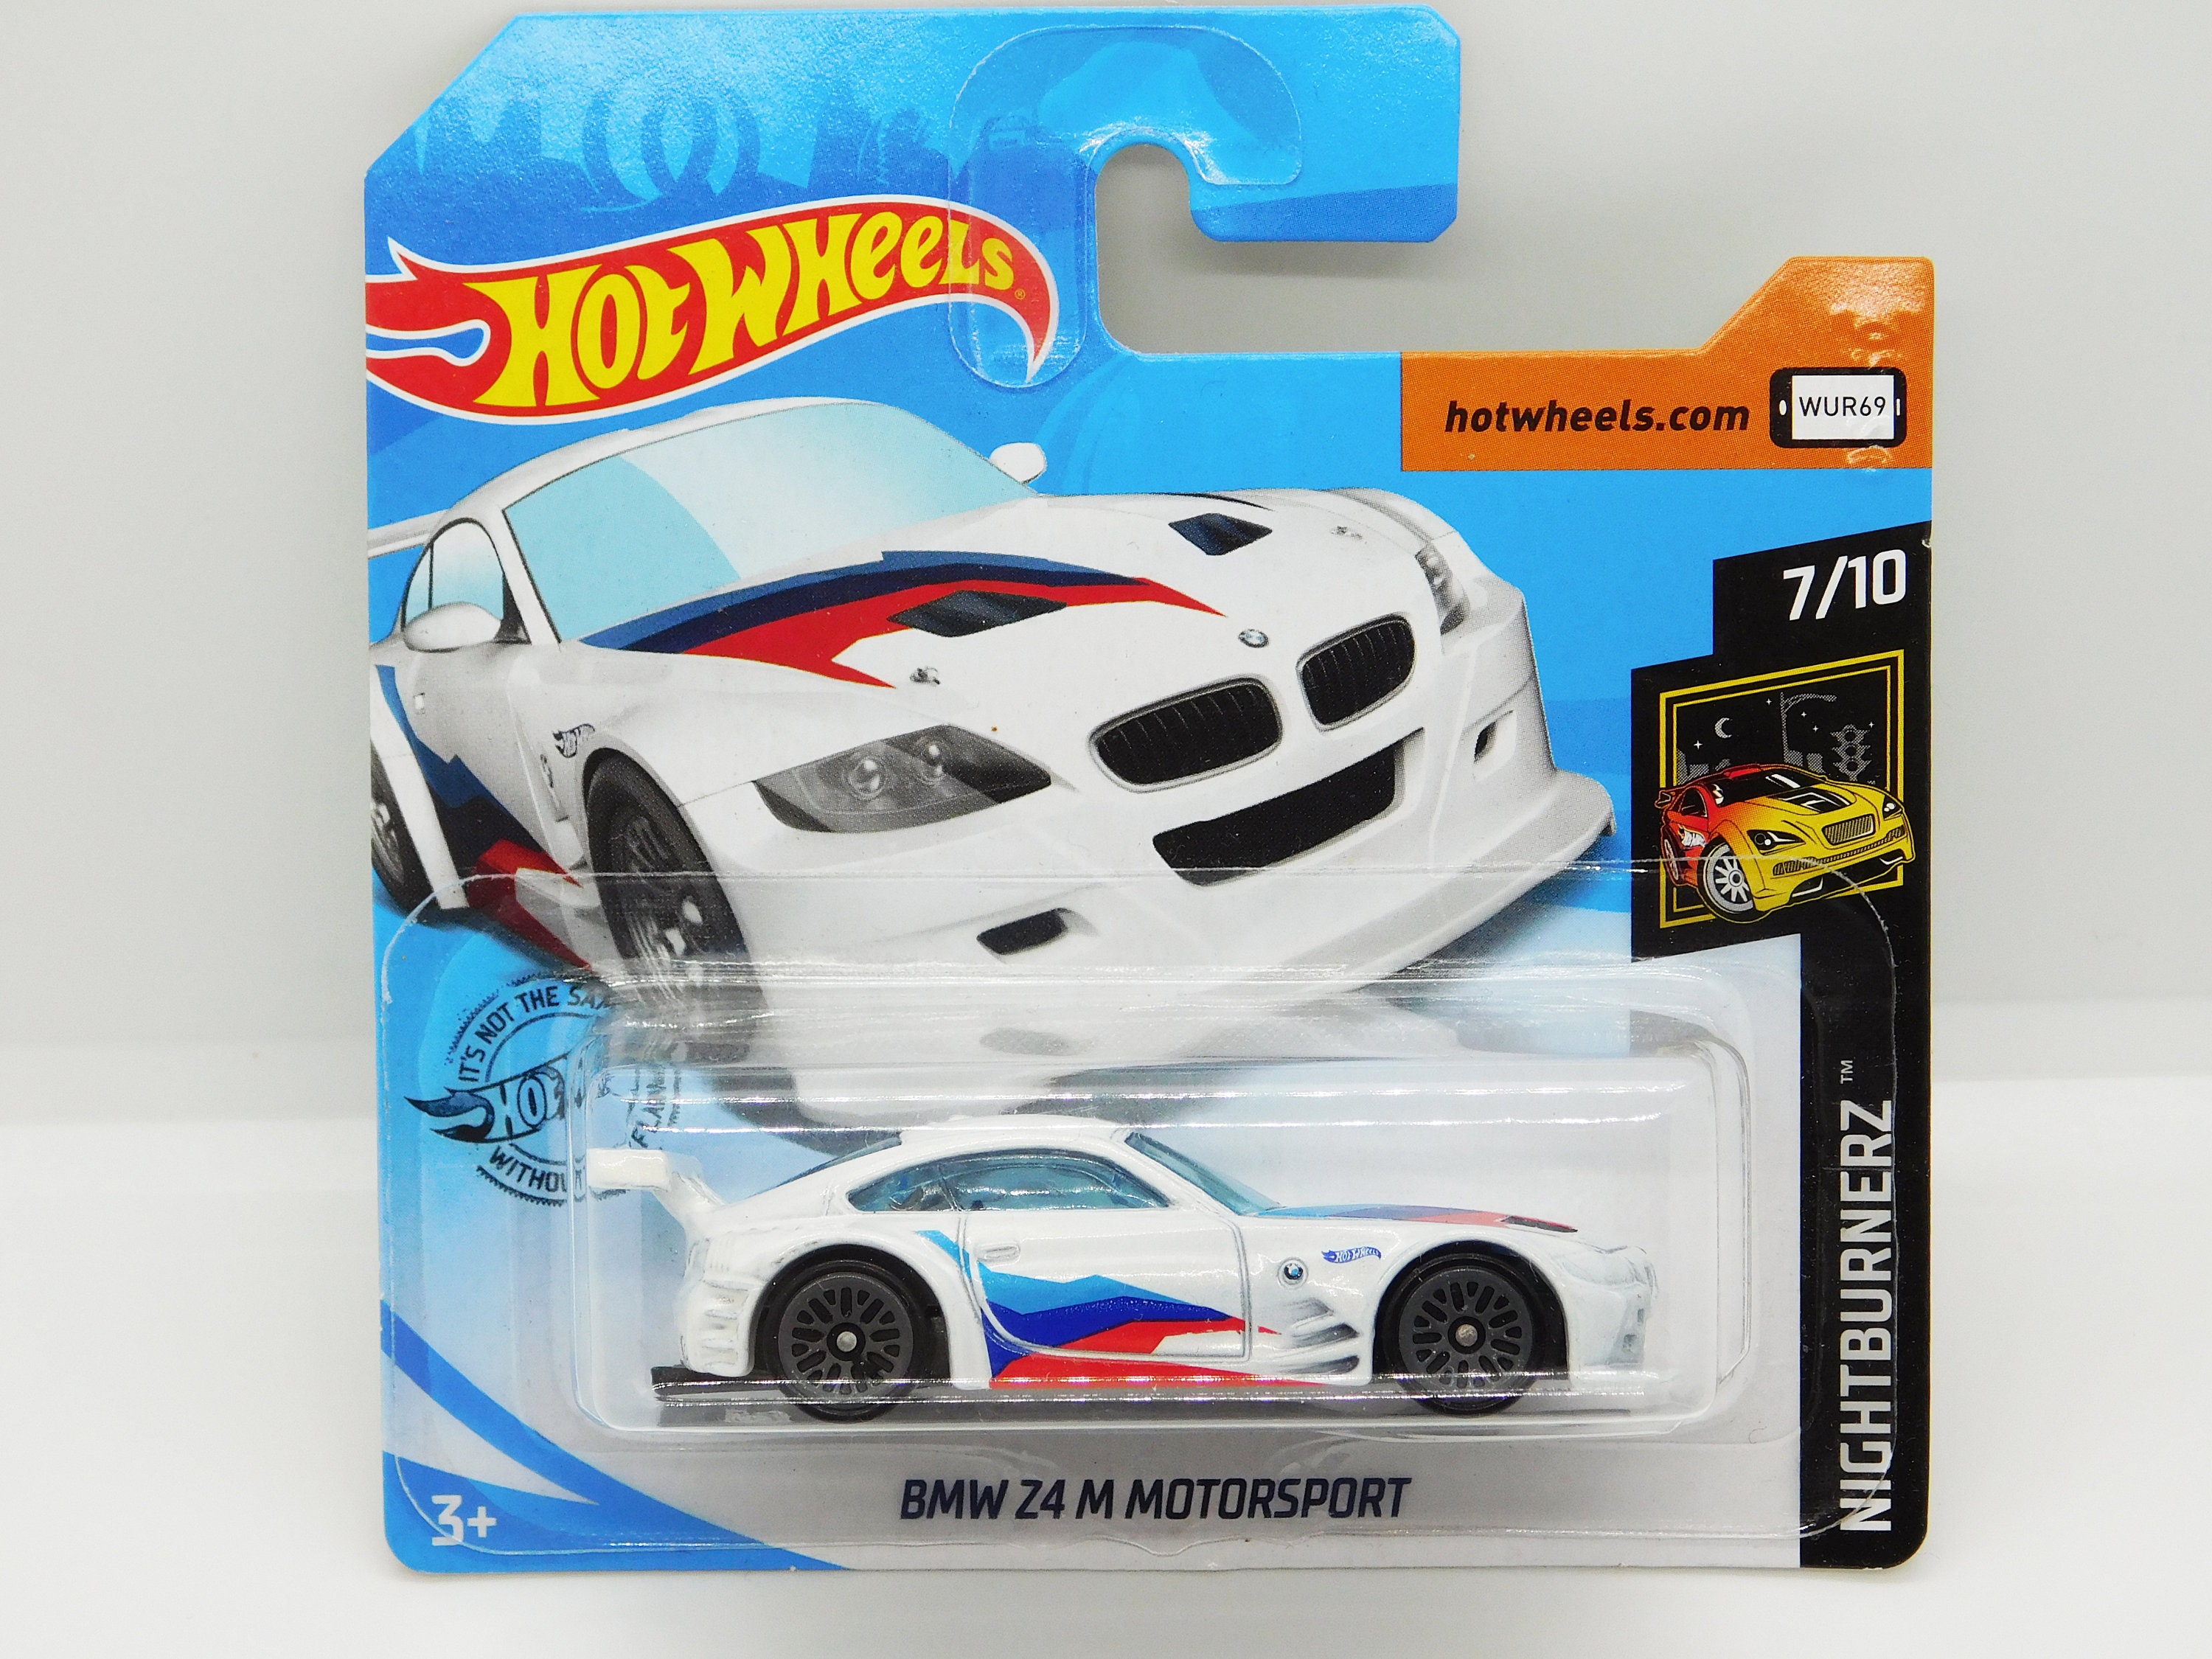 Hot Wheels Bmw Z4 M Motorsport White Rare Miniature Collectible Model ,  Geschenk ..WORLDWIDE Free Shipping With Tracking Number EVERY DAY 